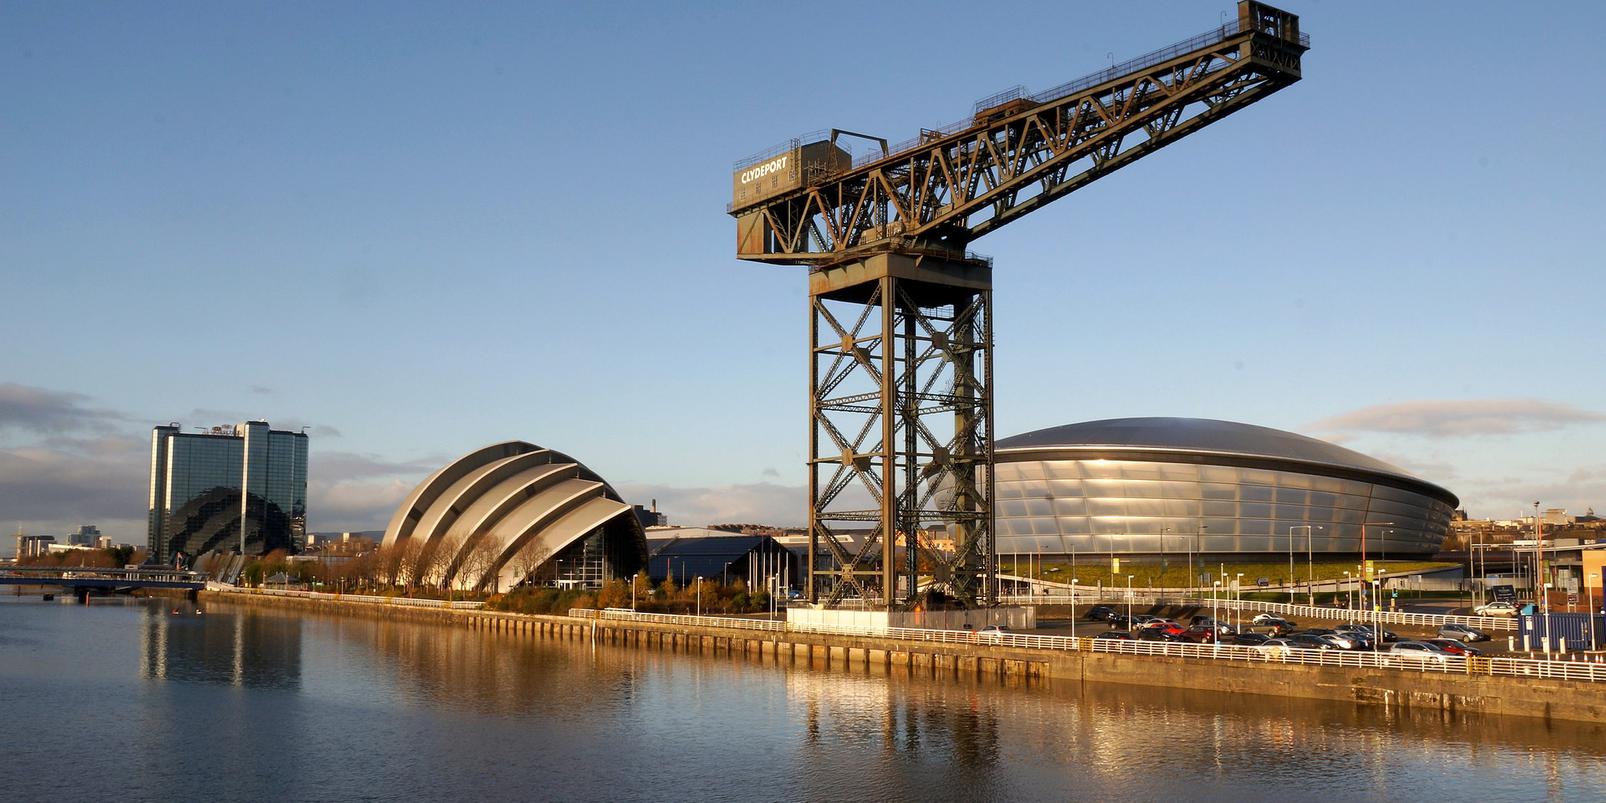 An image of Glasgow